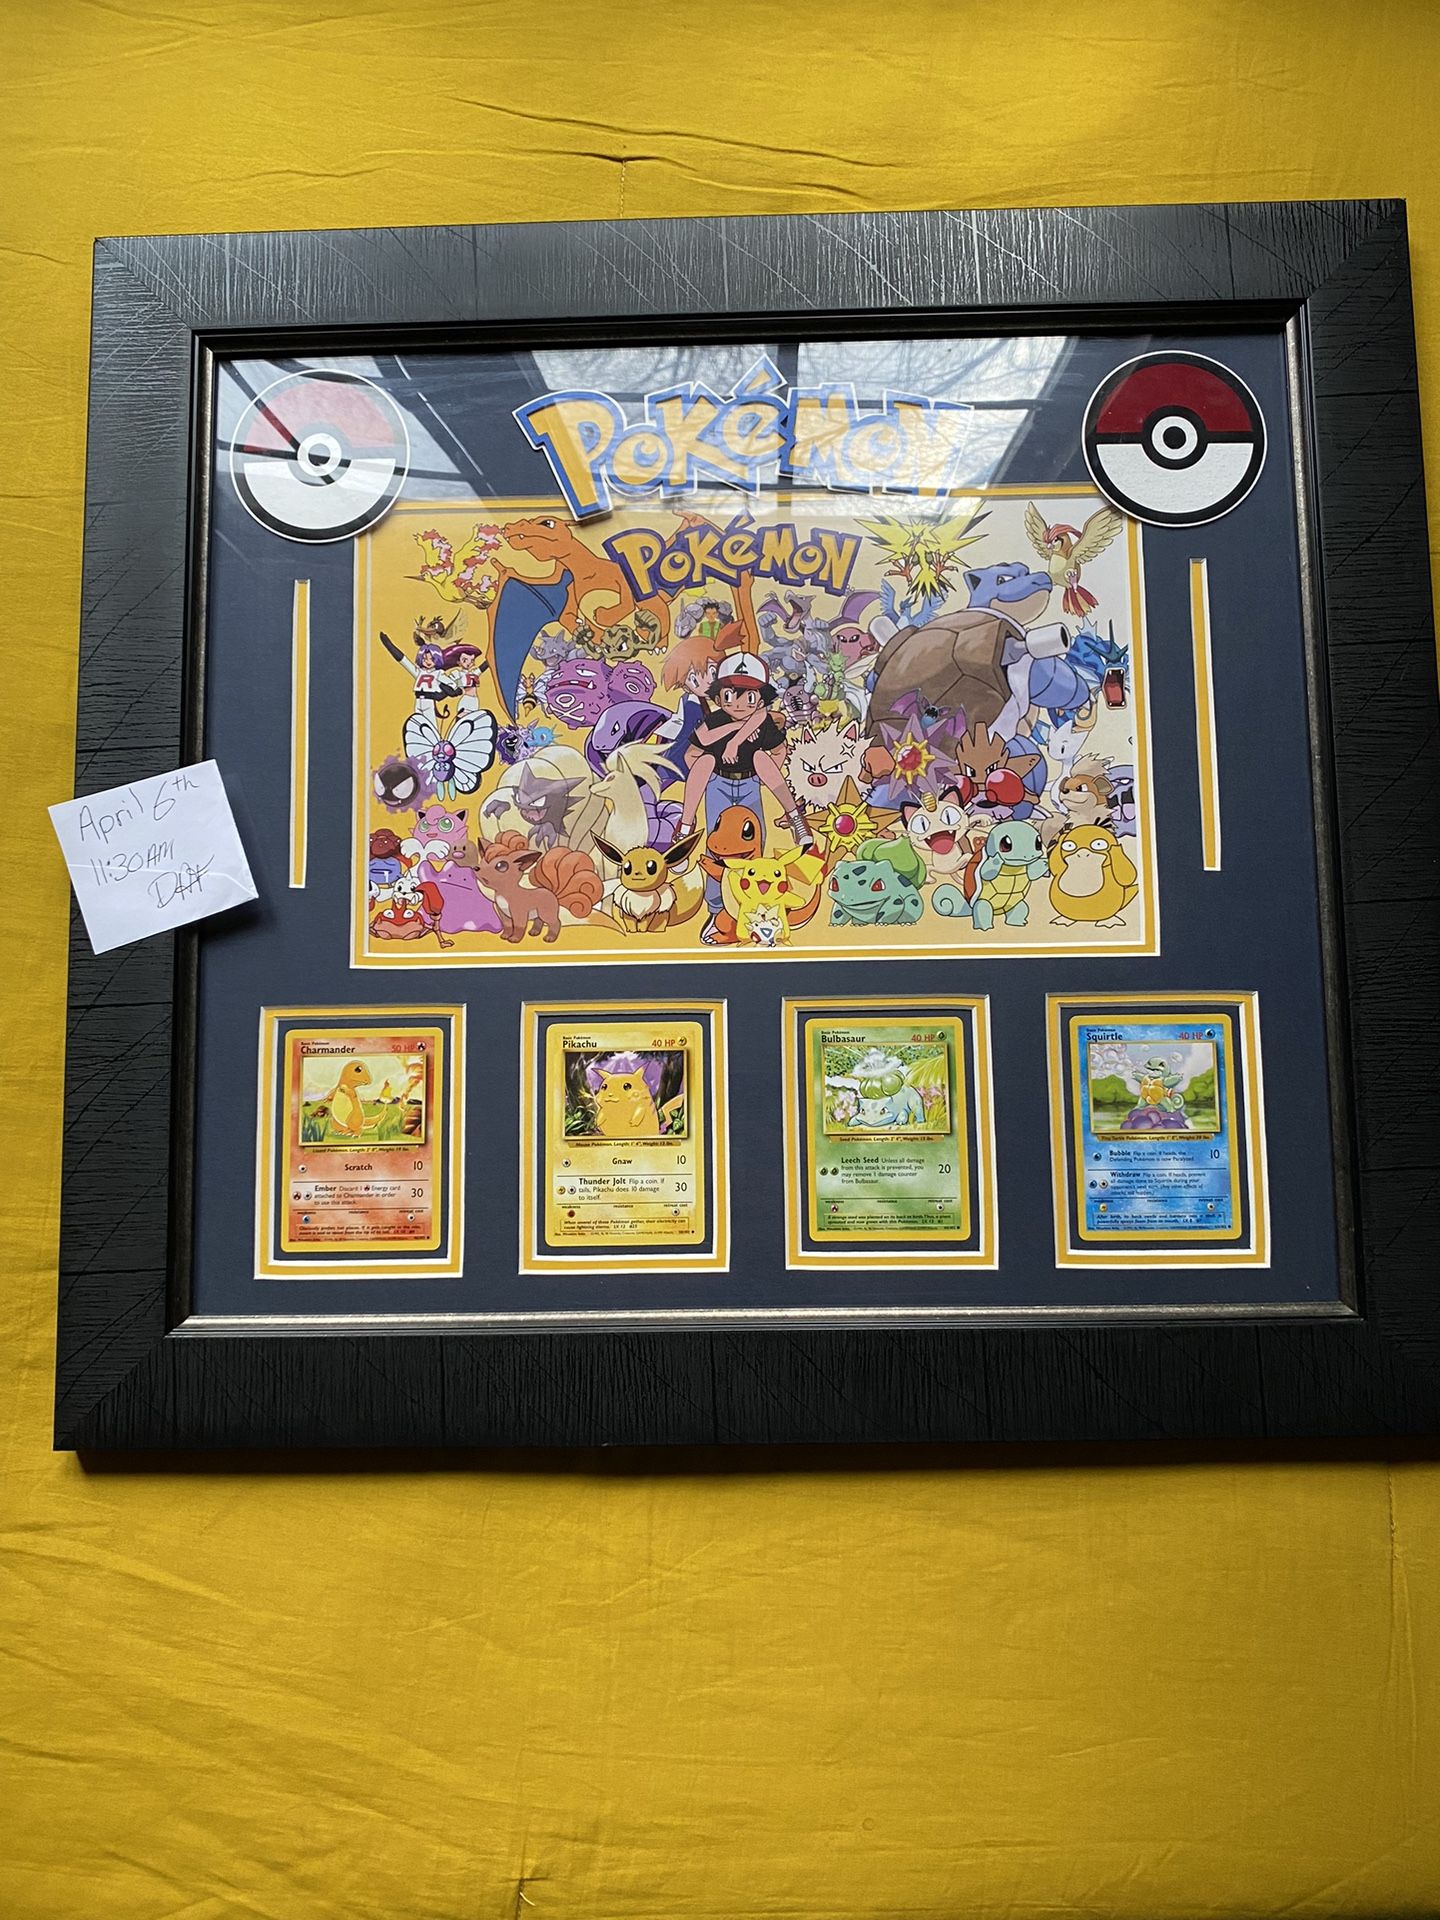 Pokémon Wall Plaque Officially Licensed